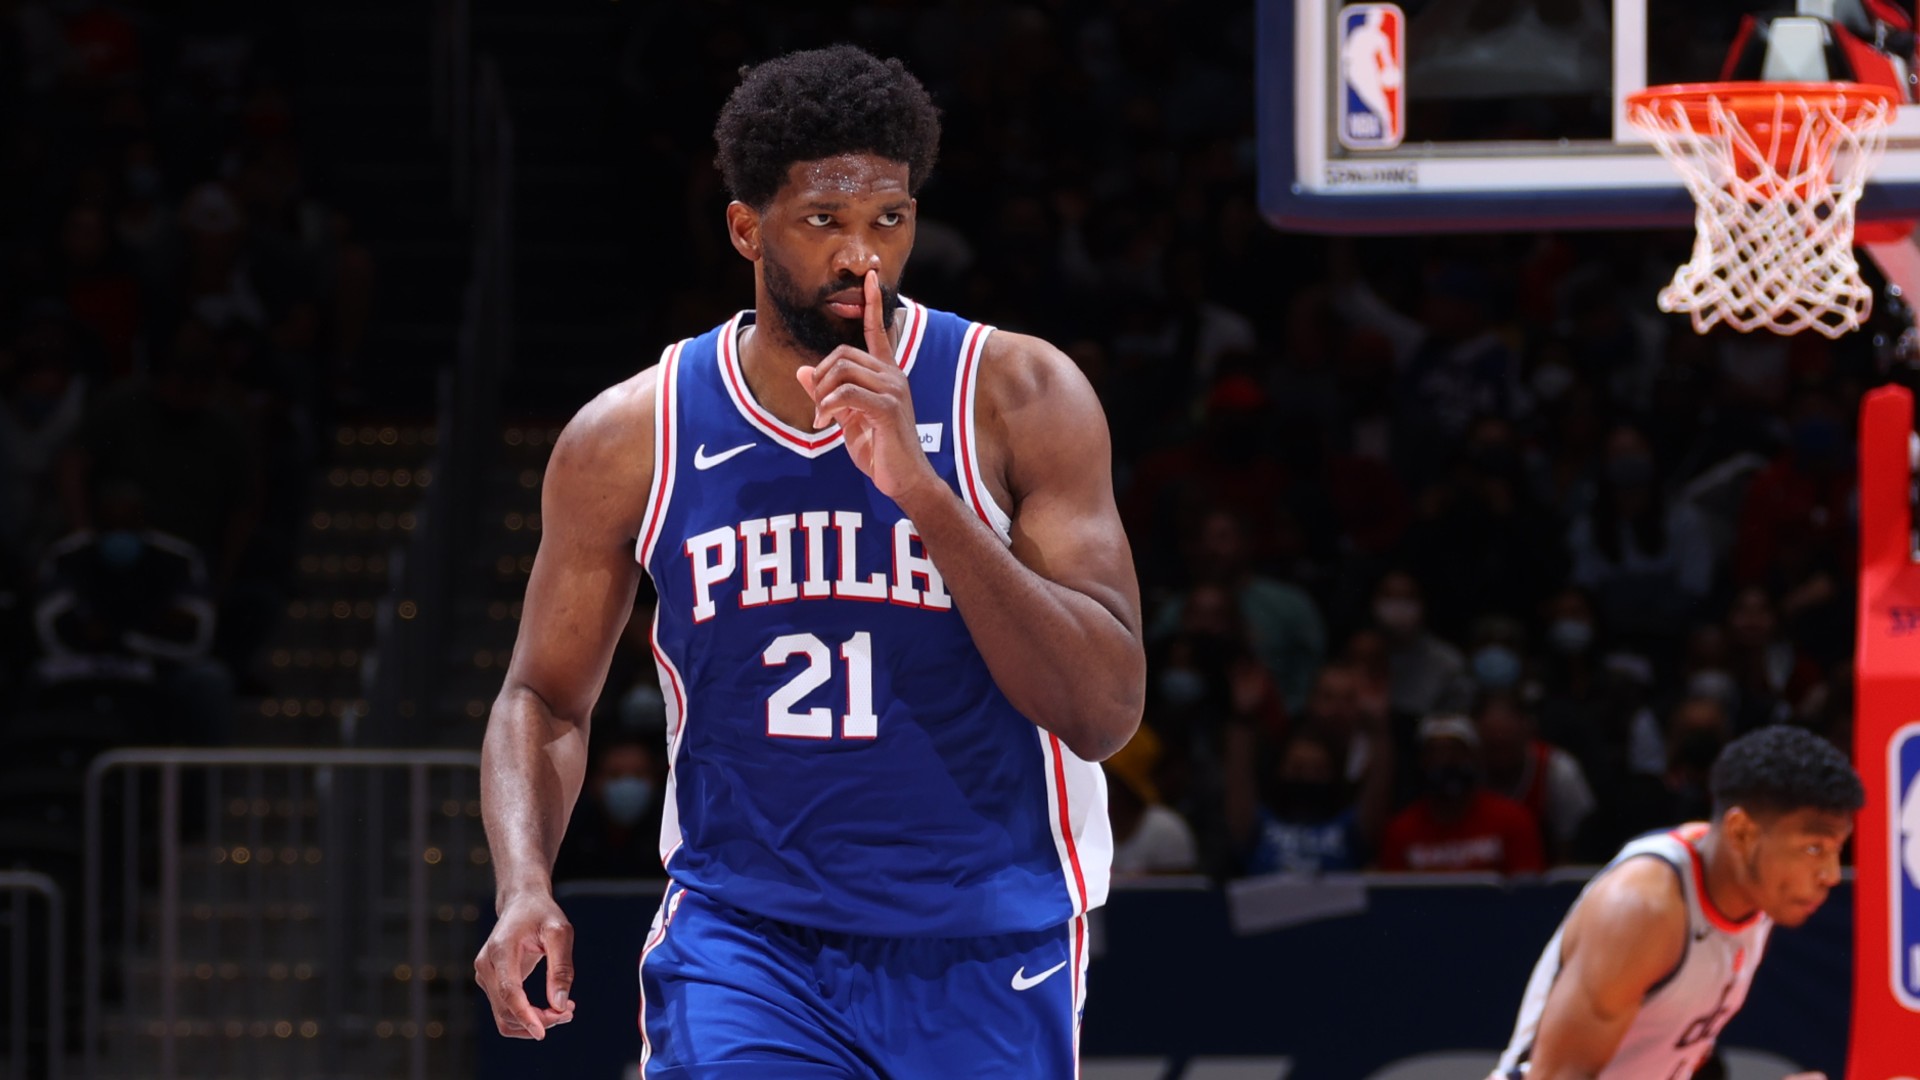 According to widespread reports, the 76ers are finalising an extension for Joel Embiid that could keep him in Philadelphia until 2027.